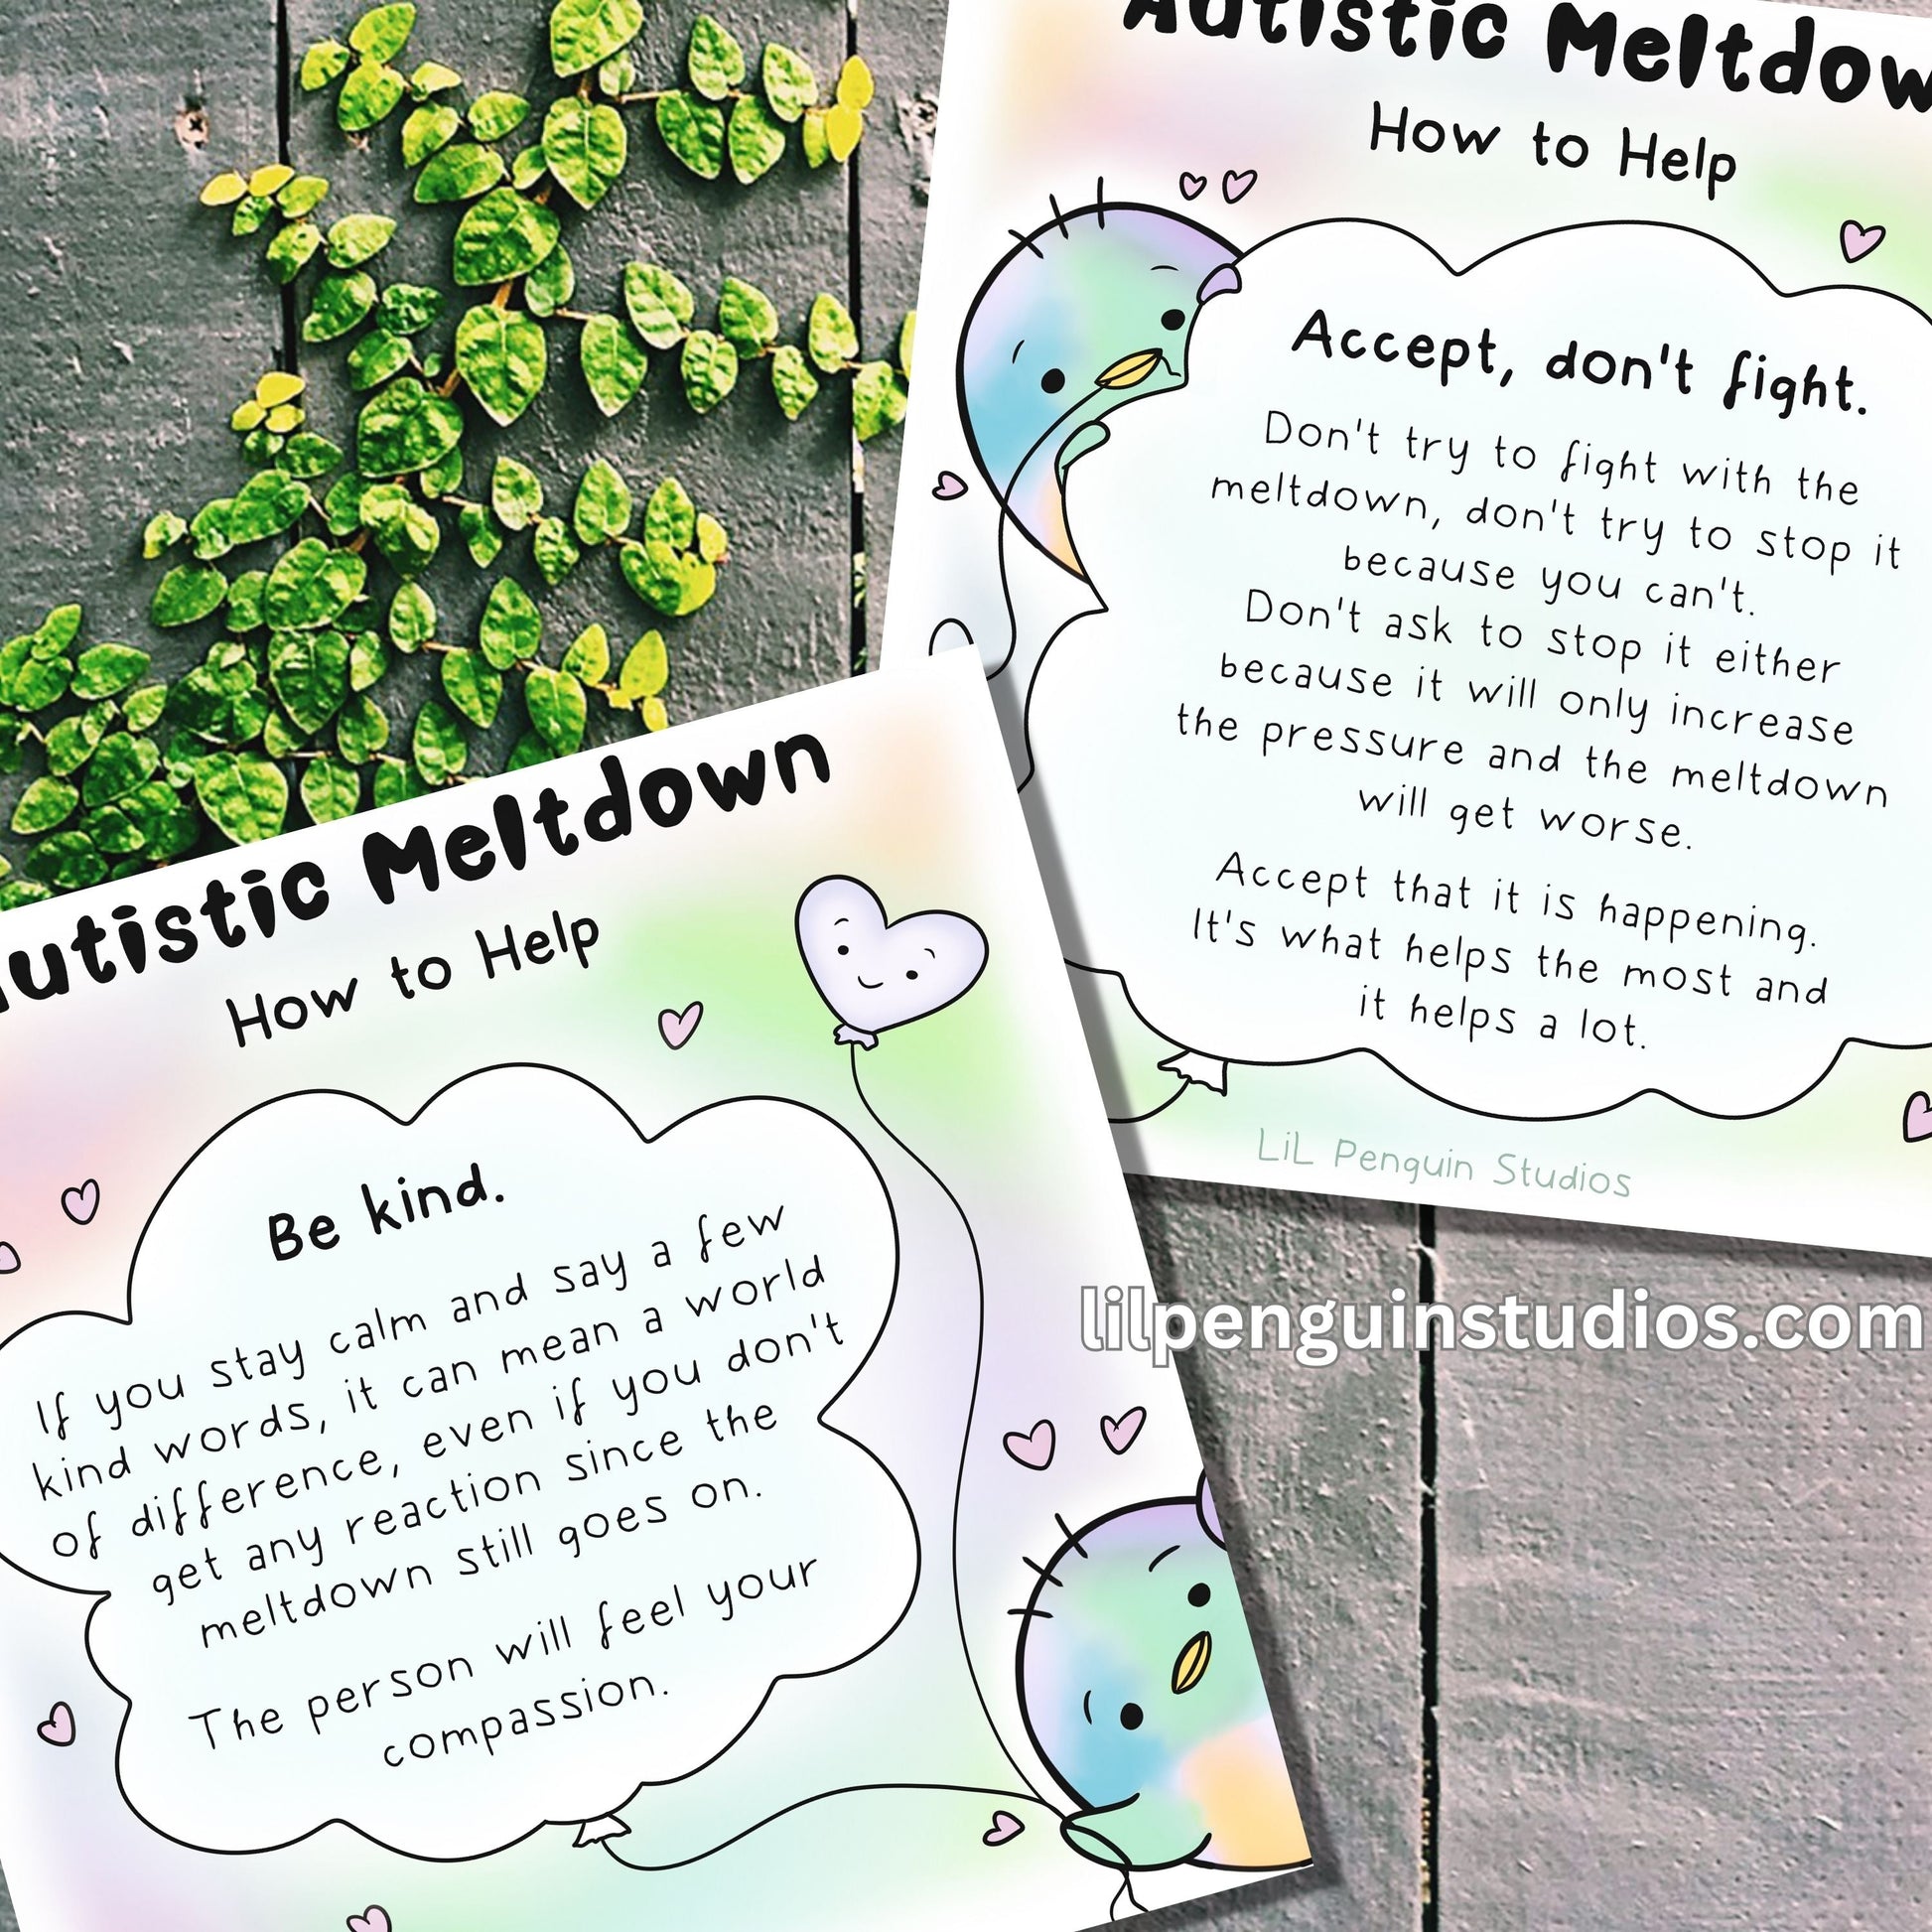 Autistic Meltdown, How to Help printable bundle with 2 worksheets. With Private Practice licence.Autistic Meltdown, How to Help printable bundle with 2 worksheets. With Private Practice licence.